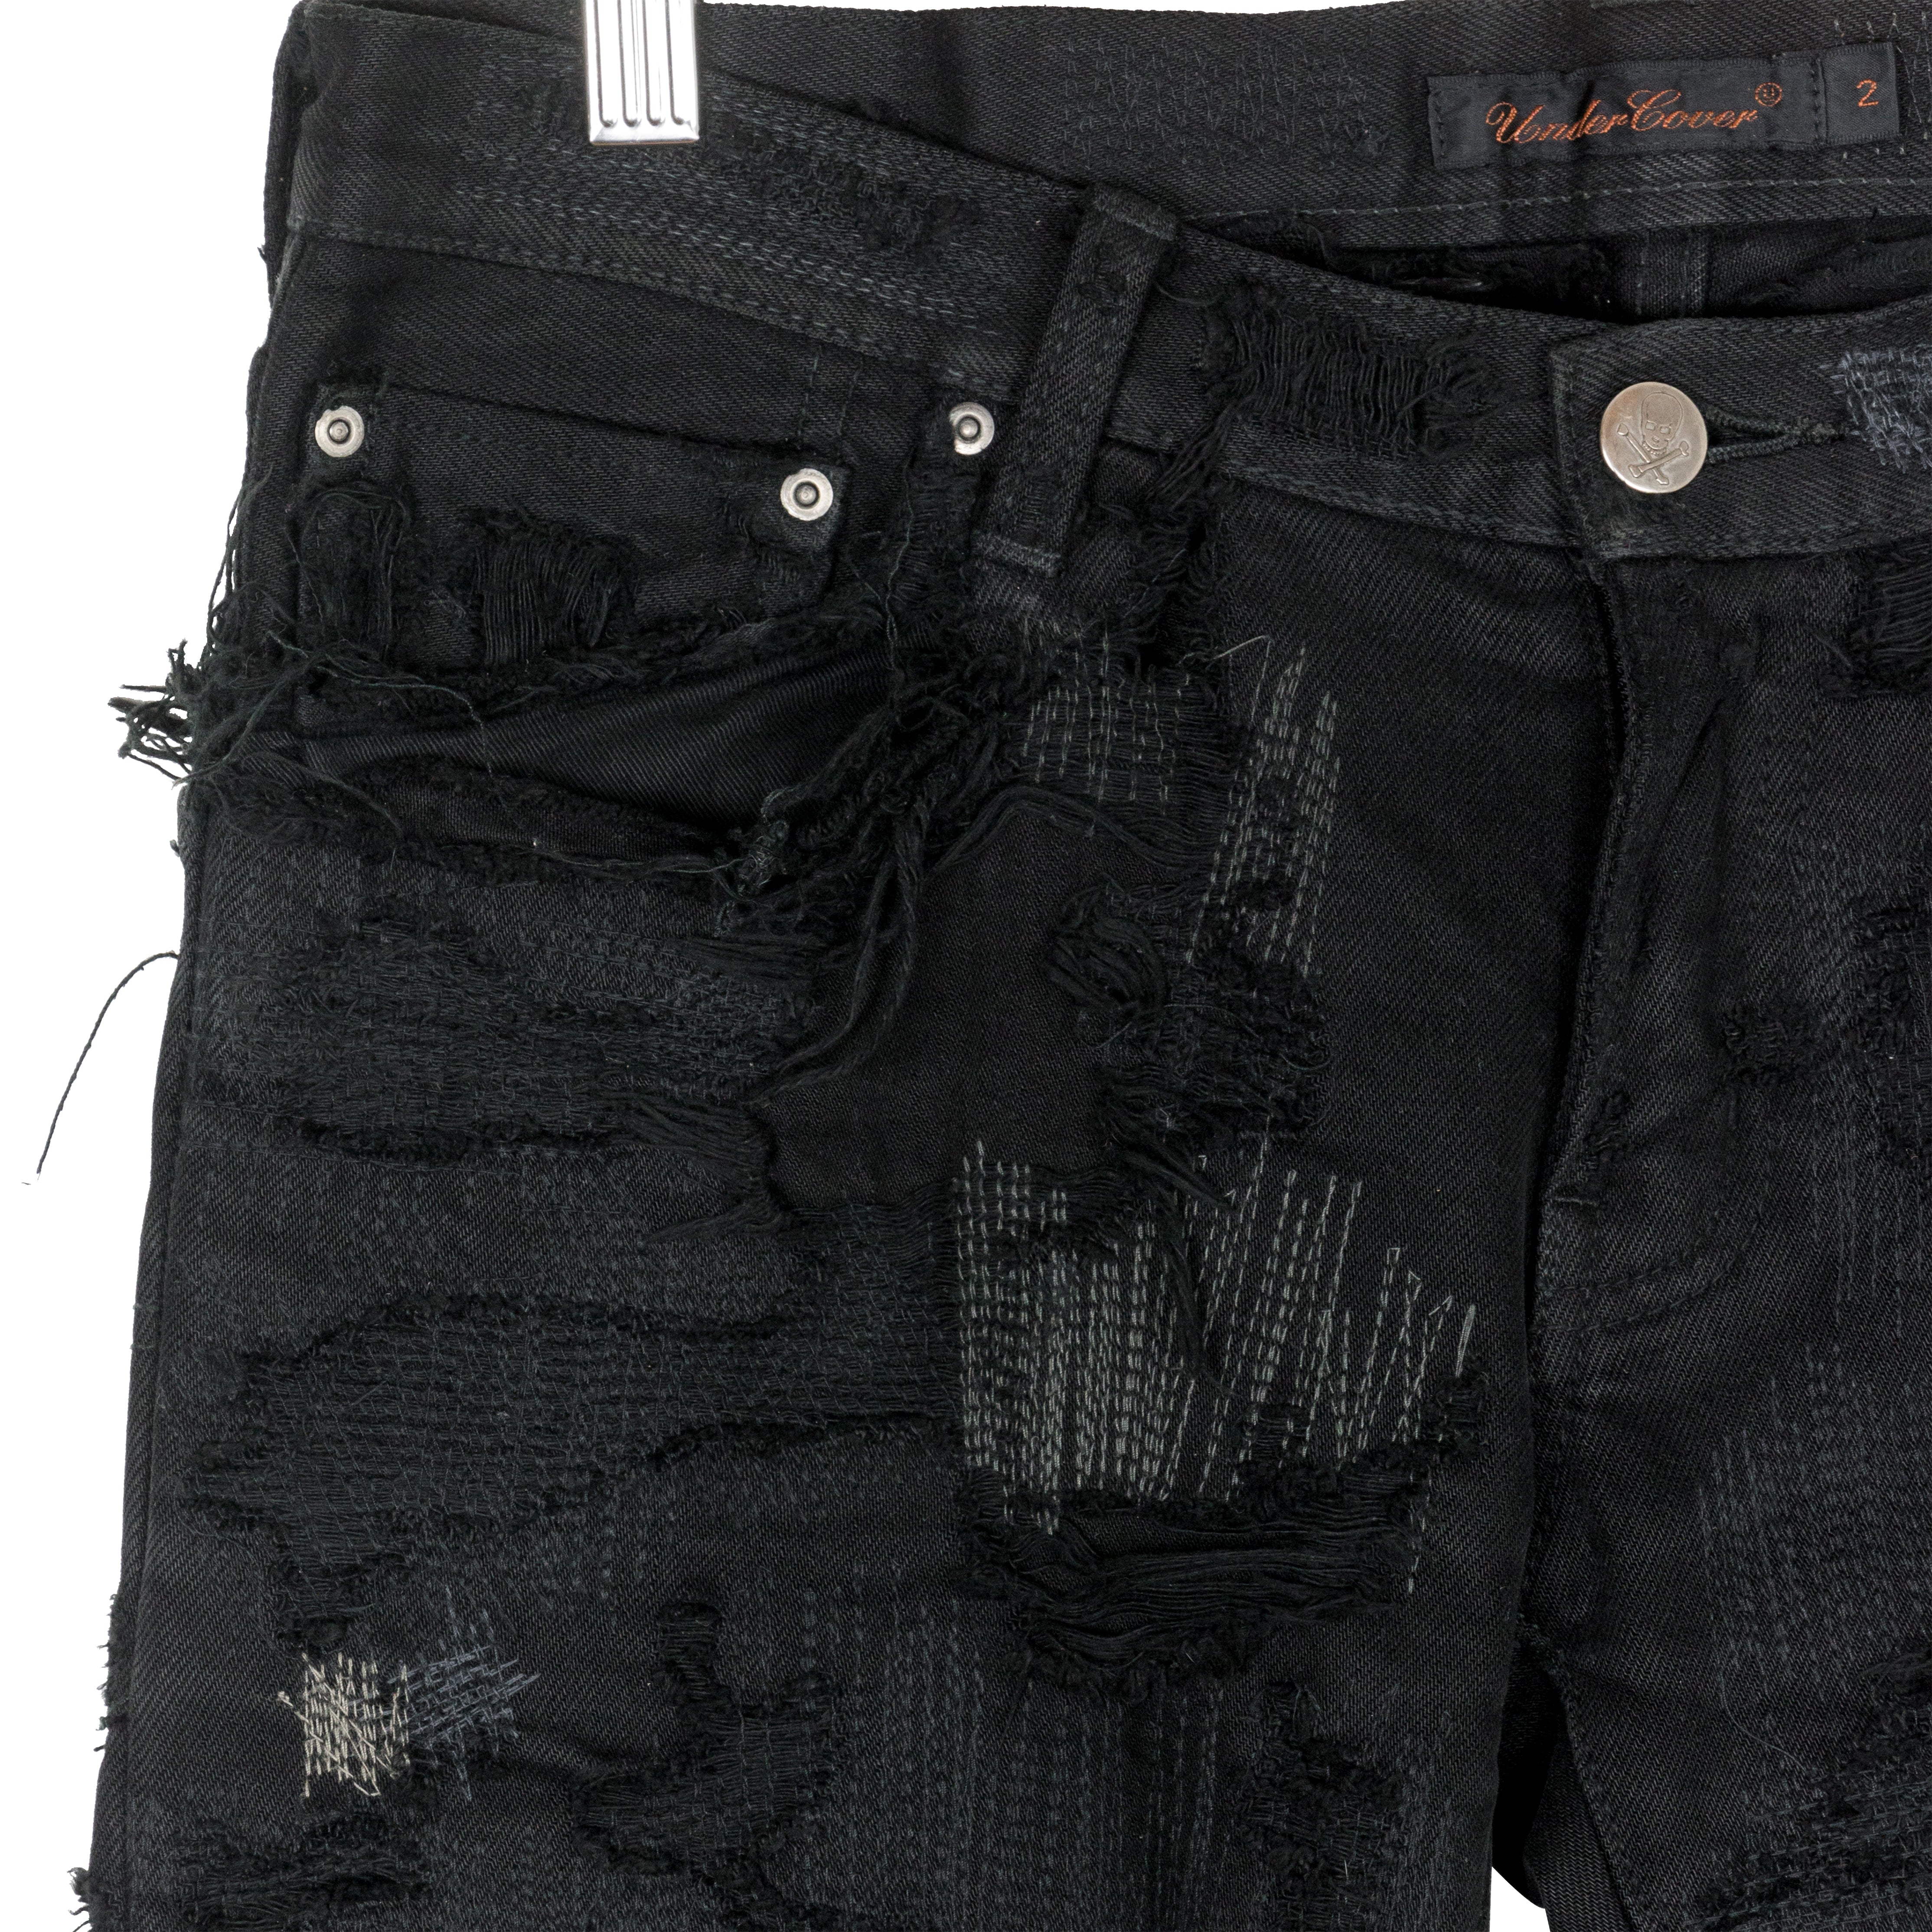 Undercover 85 Jeans - AW05 “Arts and Crafts” - SILVER LEAGUE